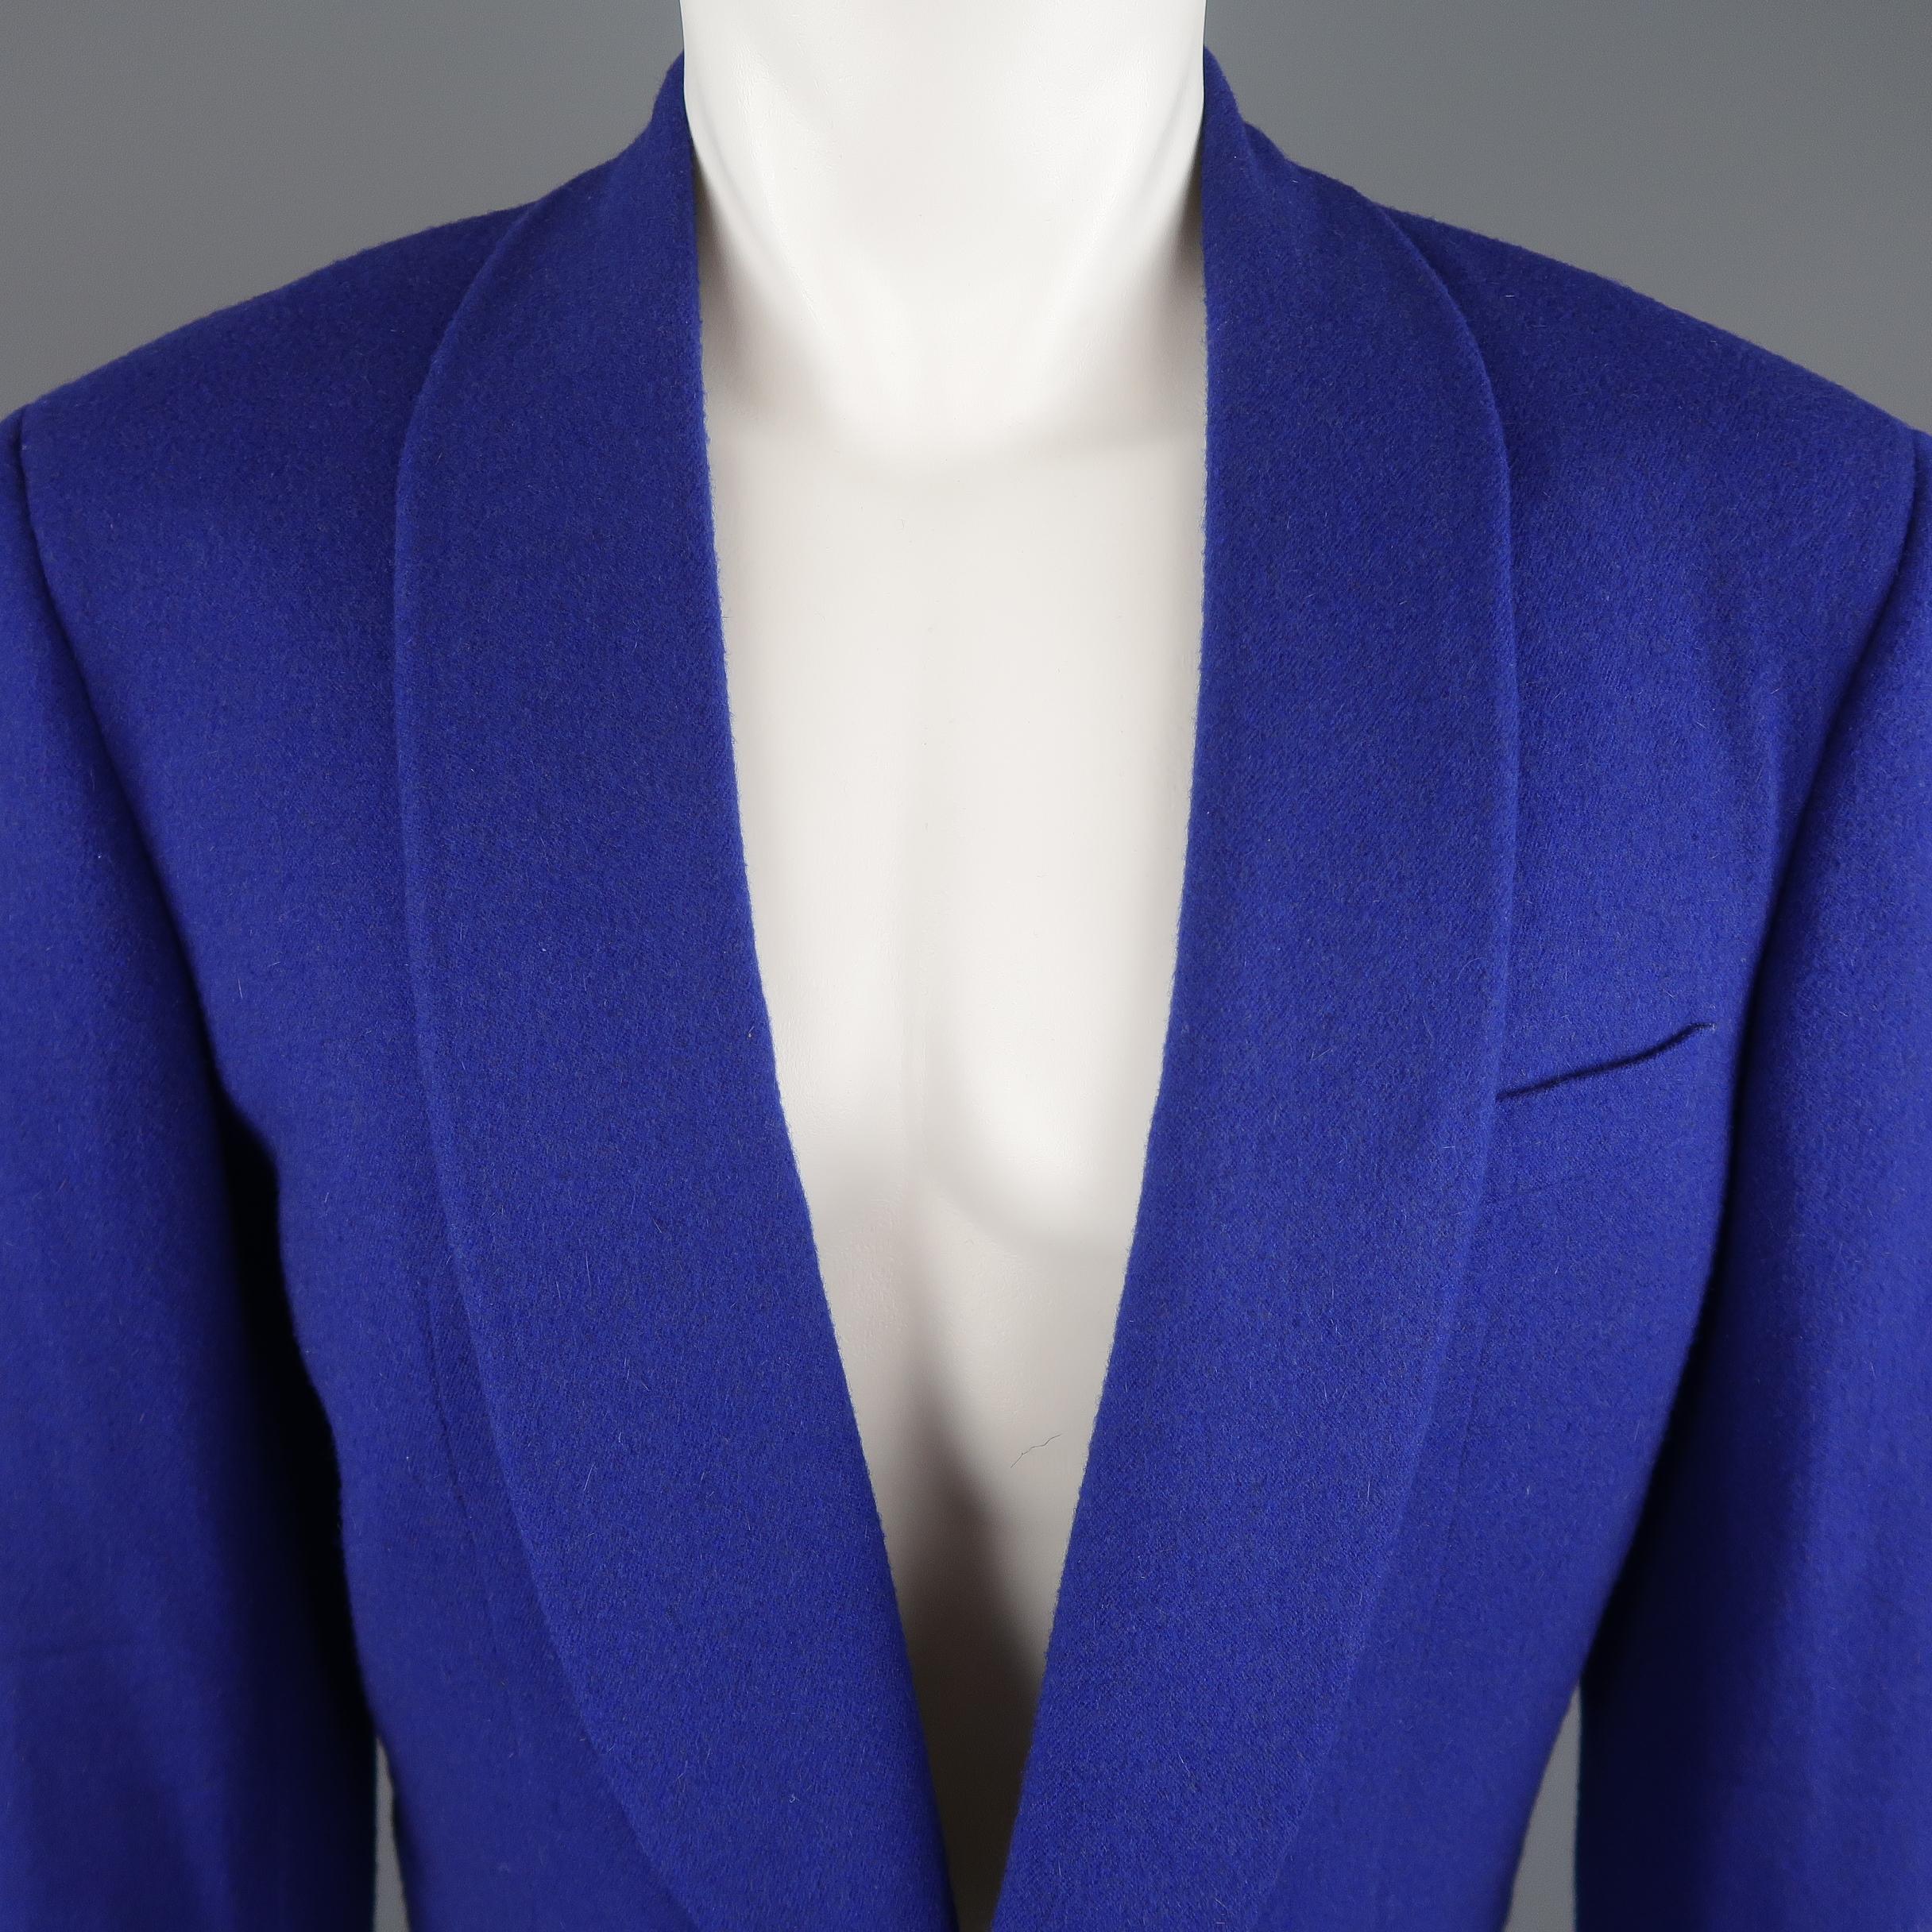 Vintage MISSONI UOMO jacket comes in royal blue wool blend fabric with a cropped hem, single button closure, and shawl collar. Made in Italy.
 
Excellent Pre-Owned Condition.
Marked: IT 48
 
Measurements:
 
Shoulder: 19 in.
Chest: 44 in.
Sleeve: 23